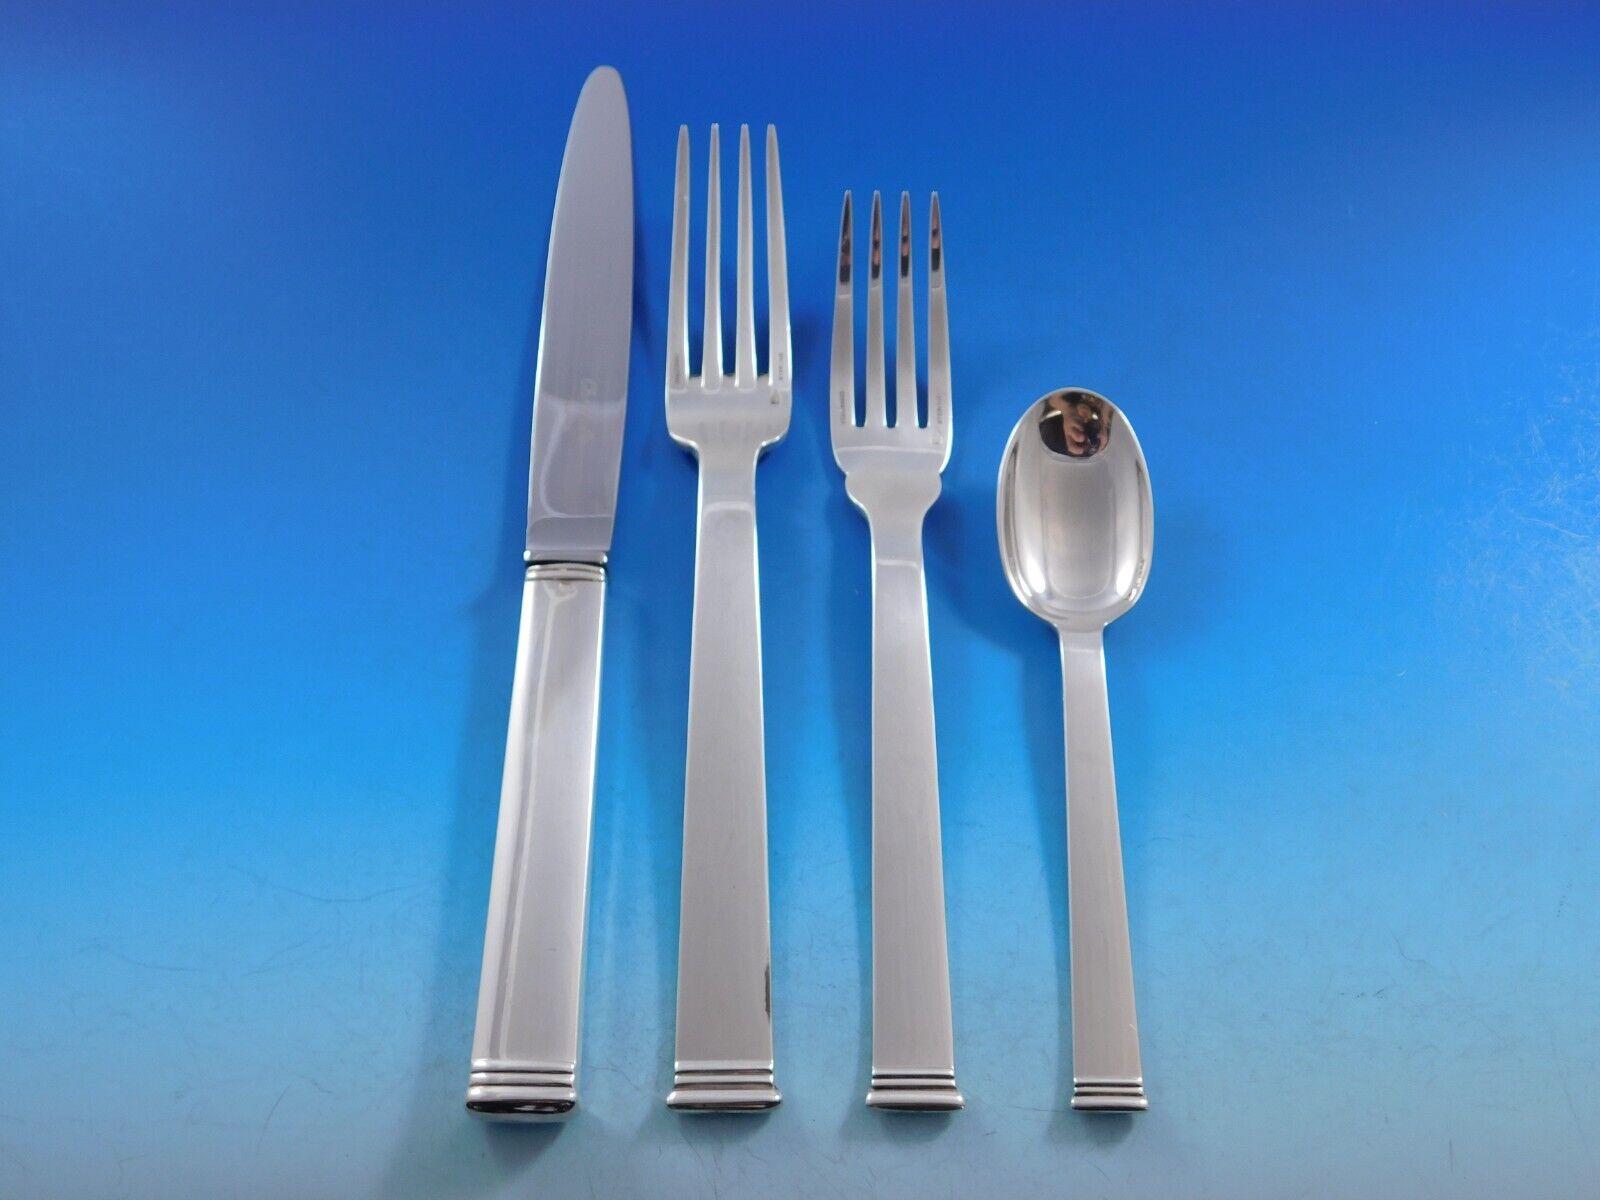 Christofle French silver flatware has been crafted by master artisans since 1830. The revolutionary style and character of Christofle dinnerware comes from collaborations with groundbreaking architects, designers, and artists from around the world.